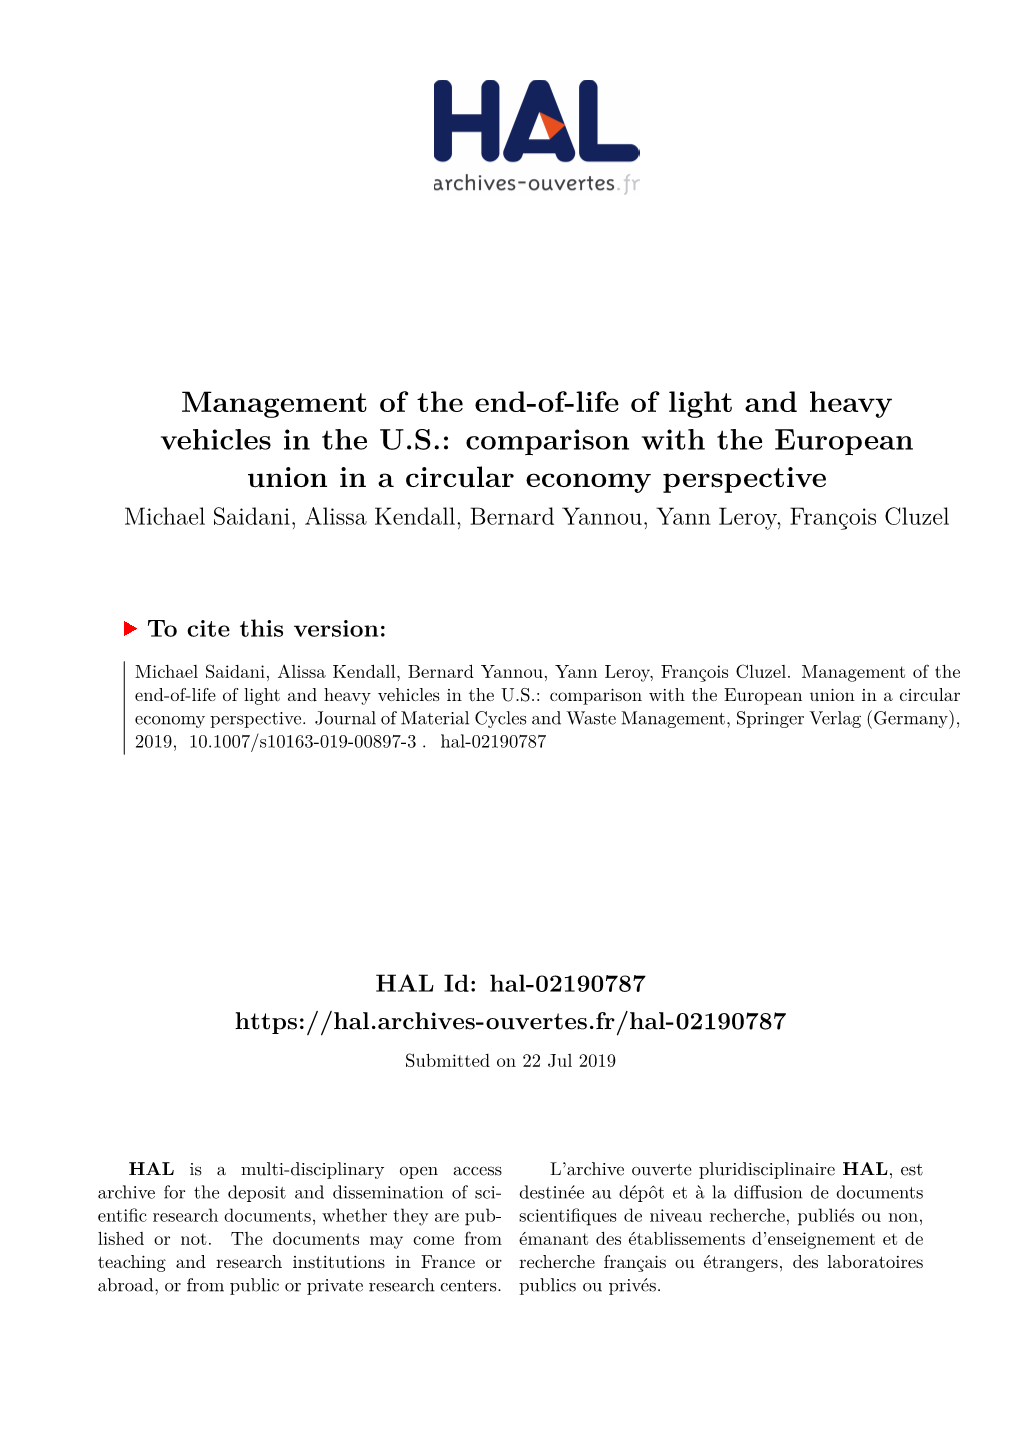 Management of the End-Of-Life of Light and Heavy Vehicles in the U.S.: Comparison with the European Union in a Circular Economy